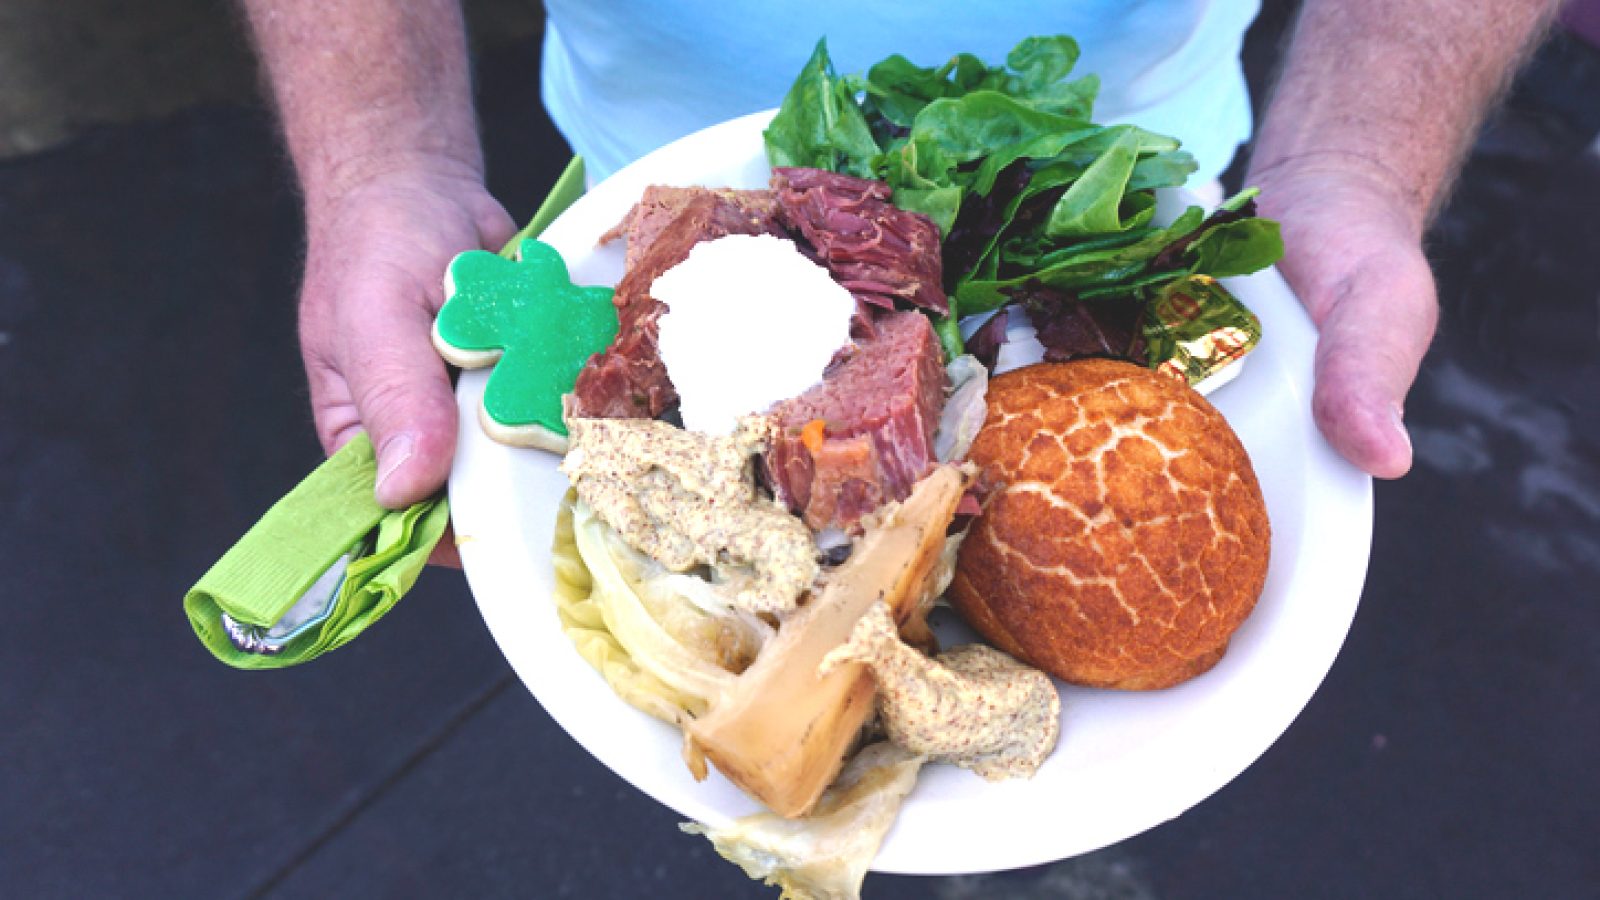 Can Catholics eat meat on St. Patricks Day? The holiday falls during